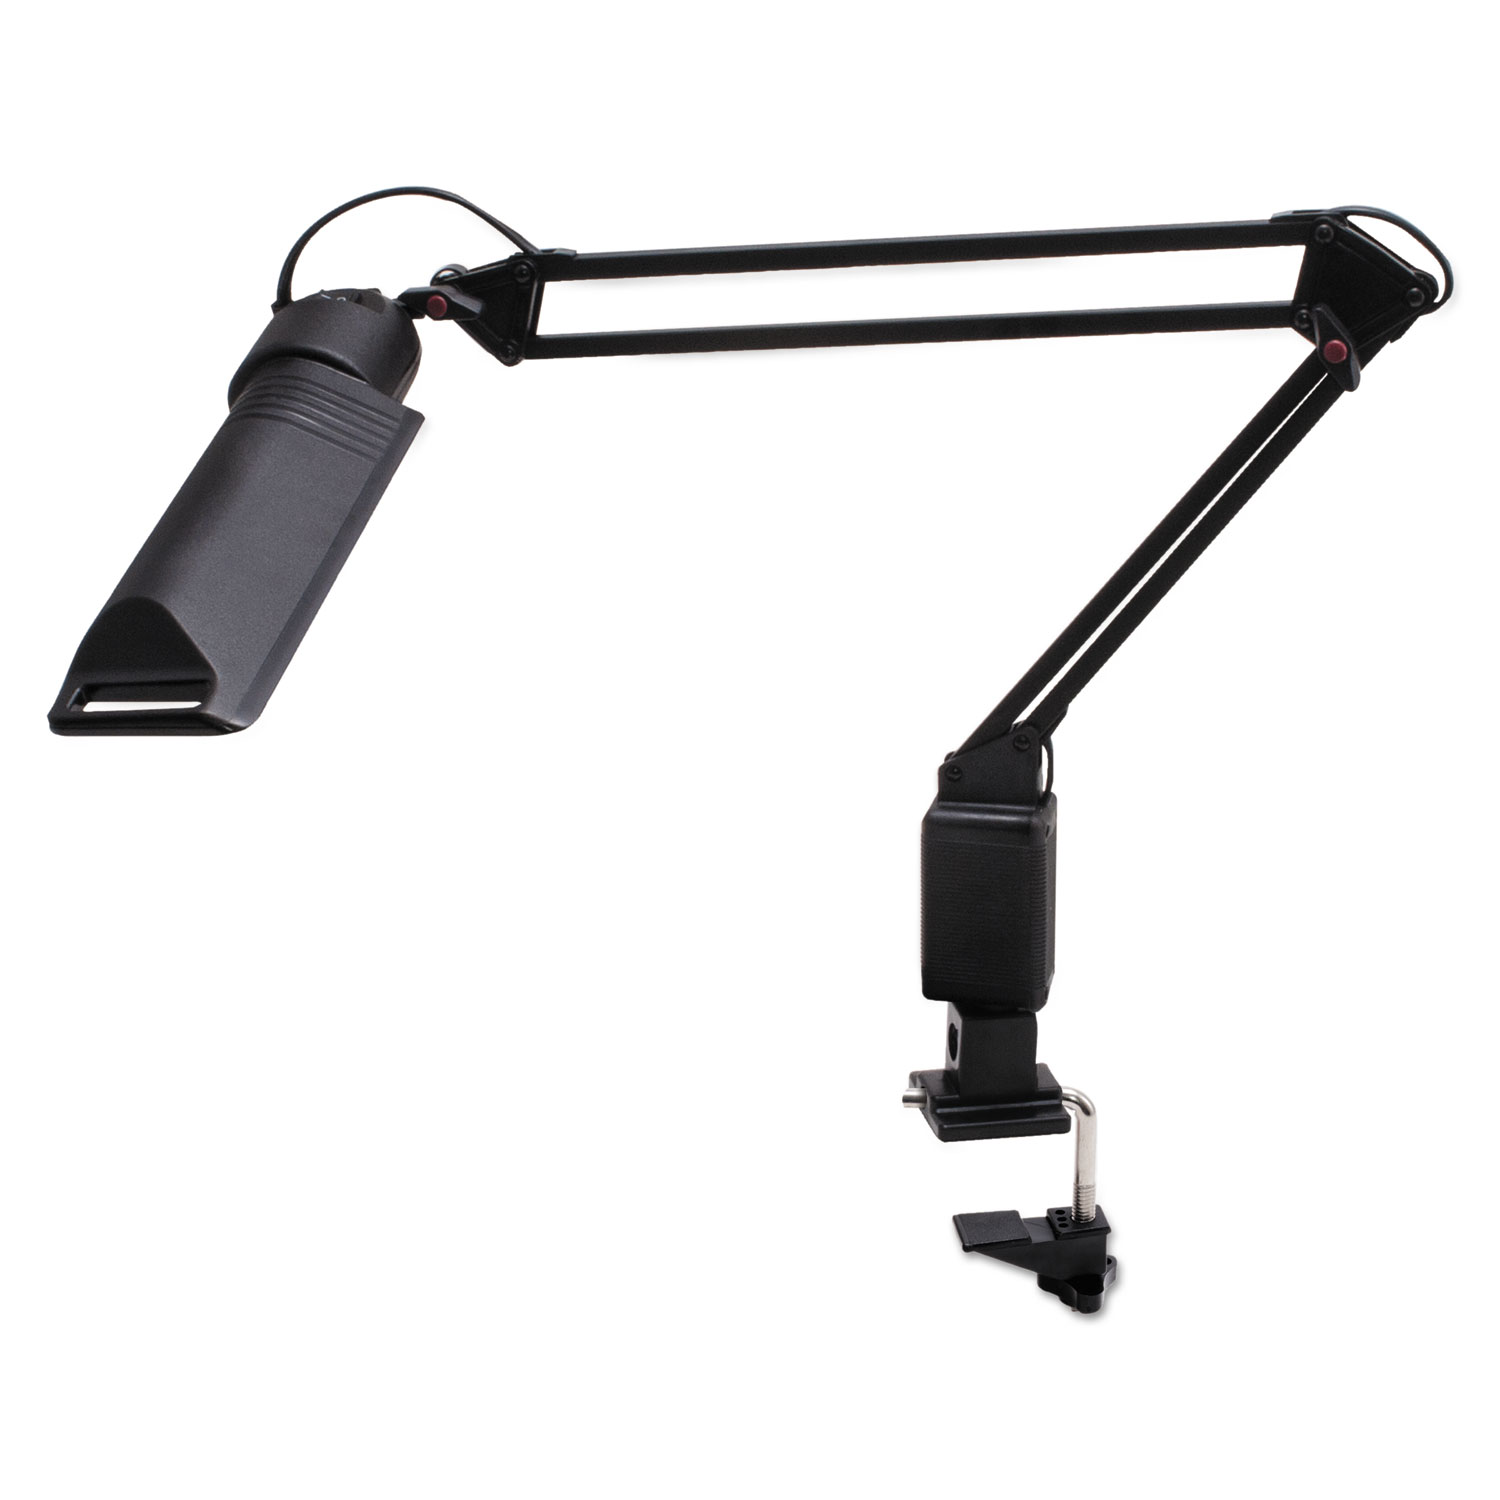 13W Fluorescent Computer Task Lamp, 2-1/4 Clamp-On or Desk Base, 30 Arm Reach